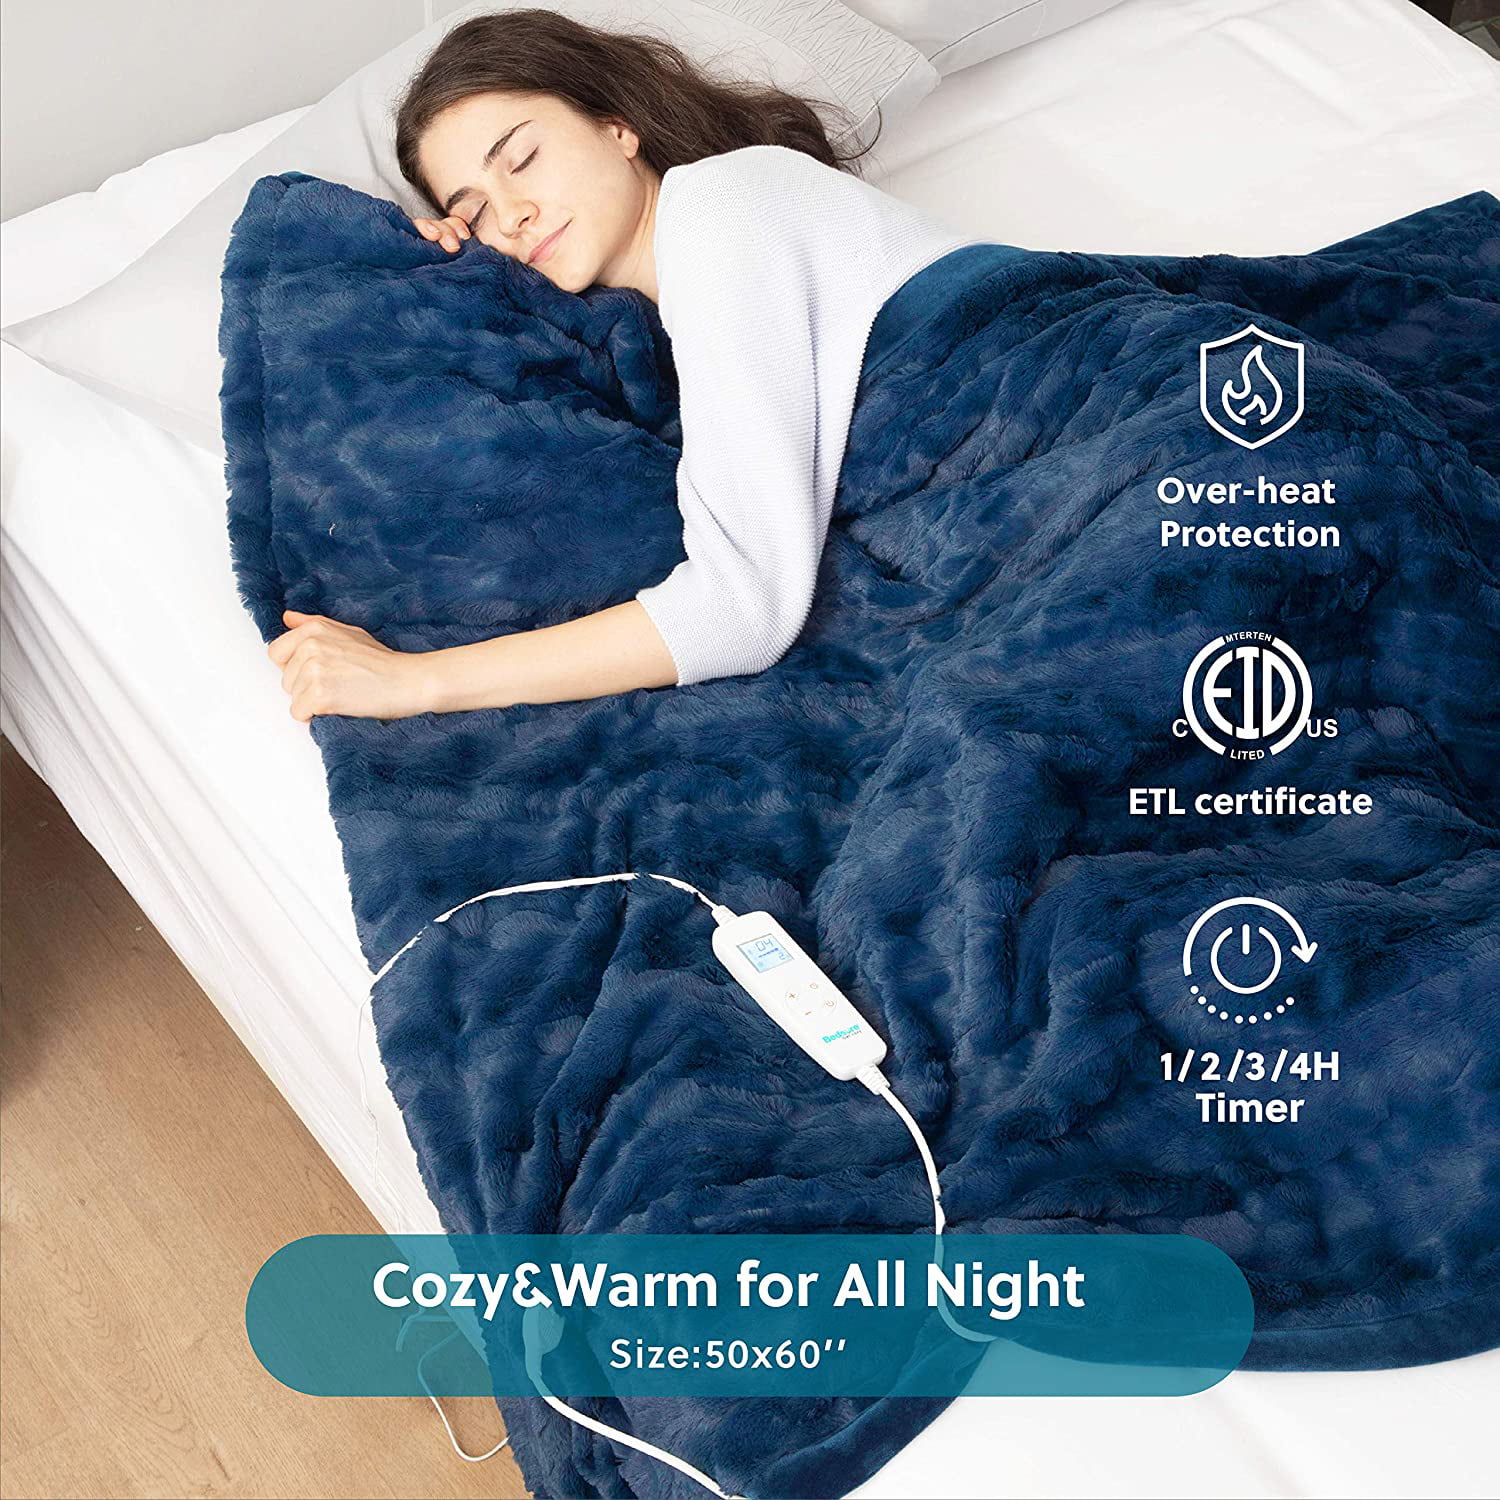 Bedsure Heated Blanket Throw Electric - with 6 Heat Setting, Fast - Heating  Blanket 1/2/3/4 H Timer, Auto - Off, Low Voltage Fuzzy Super Soft Flannel  